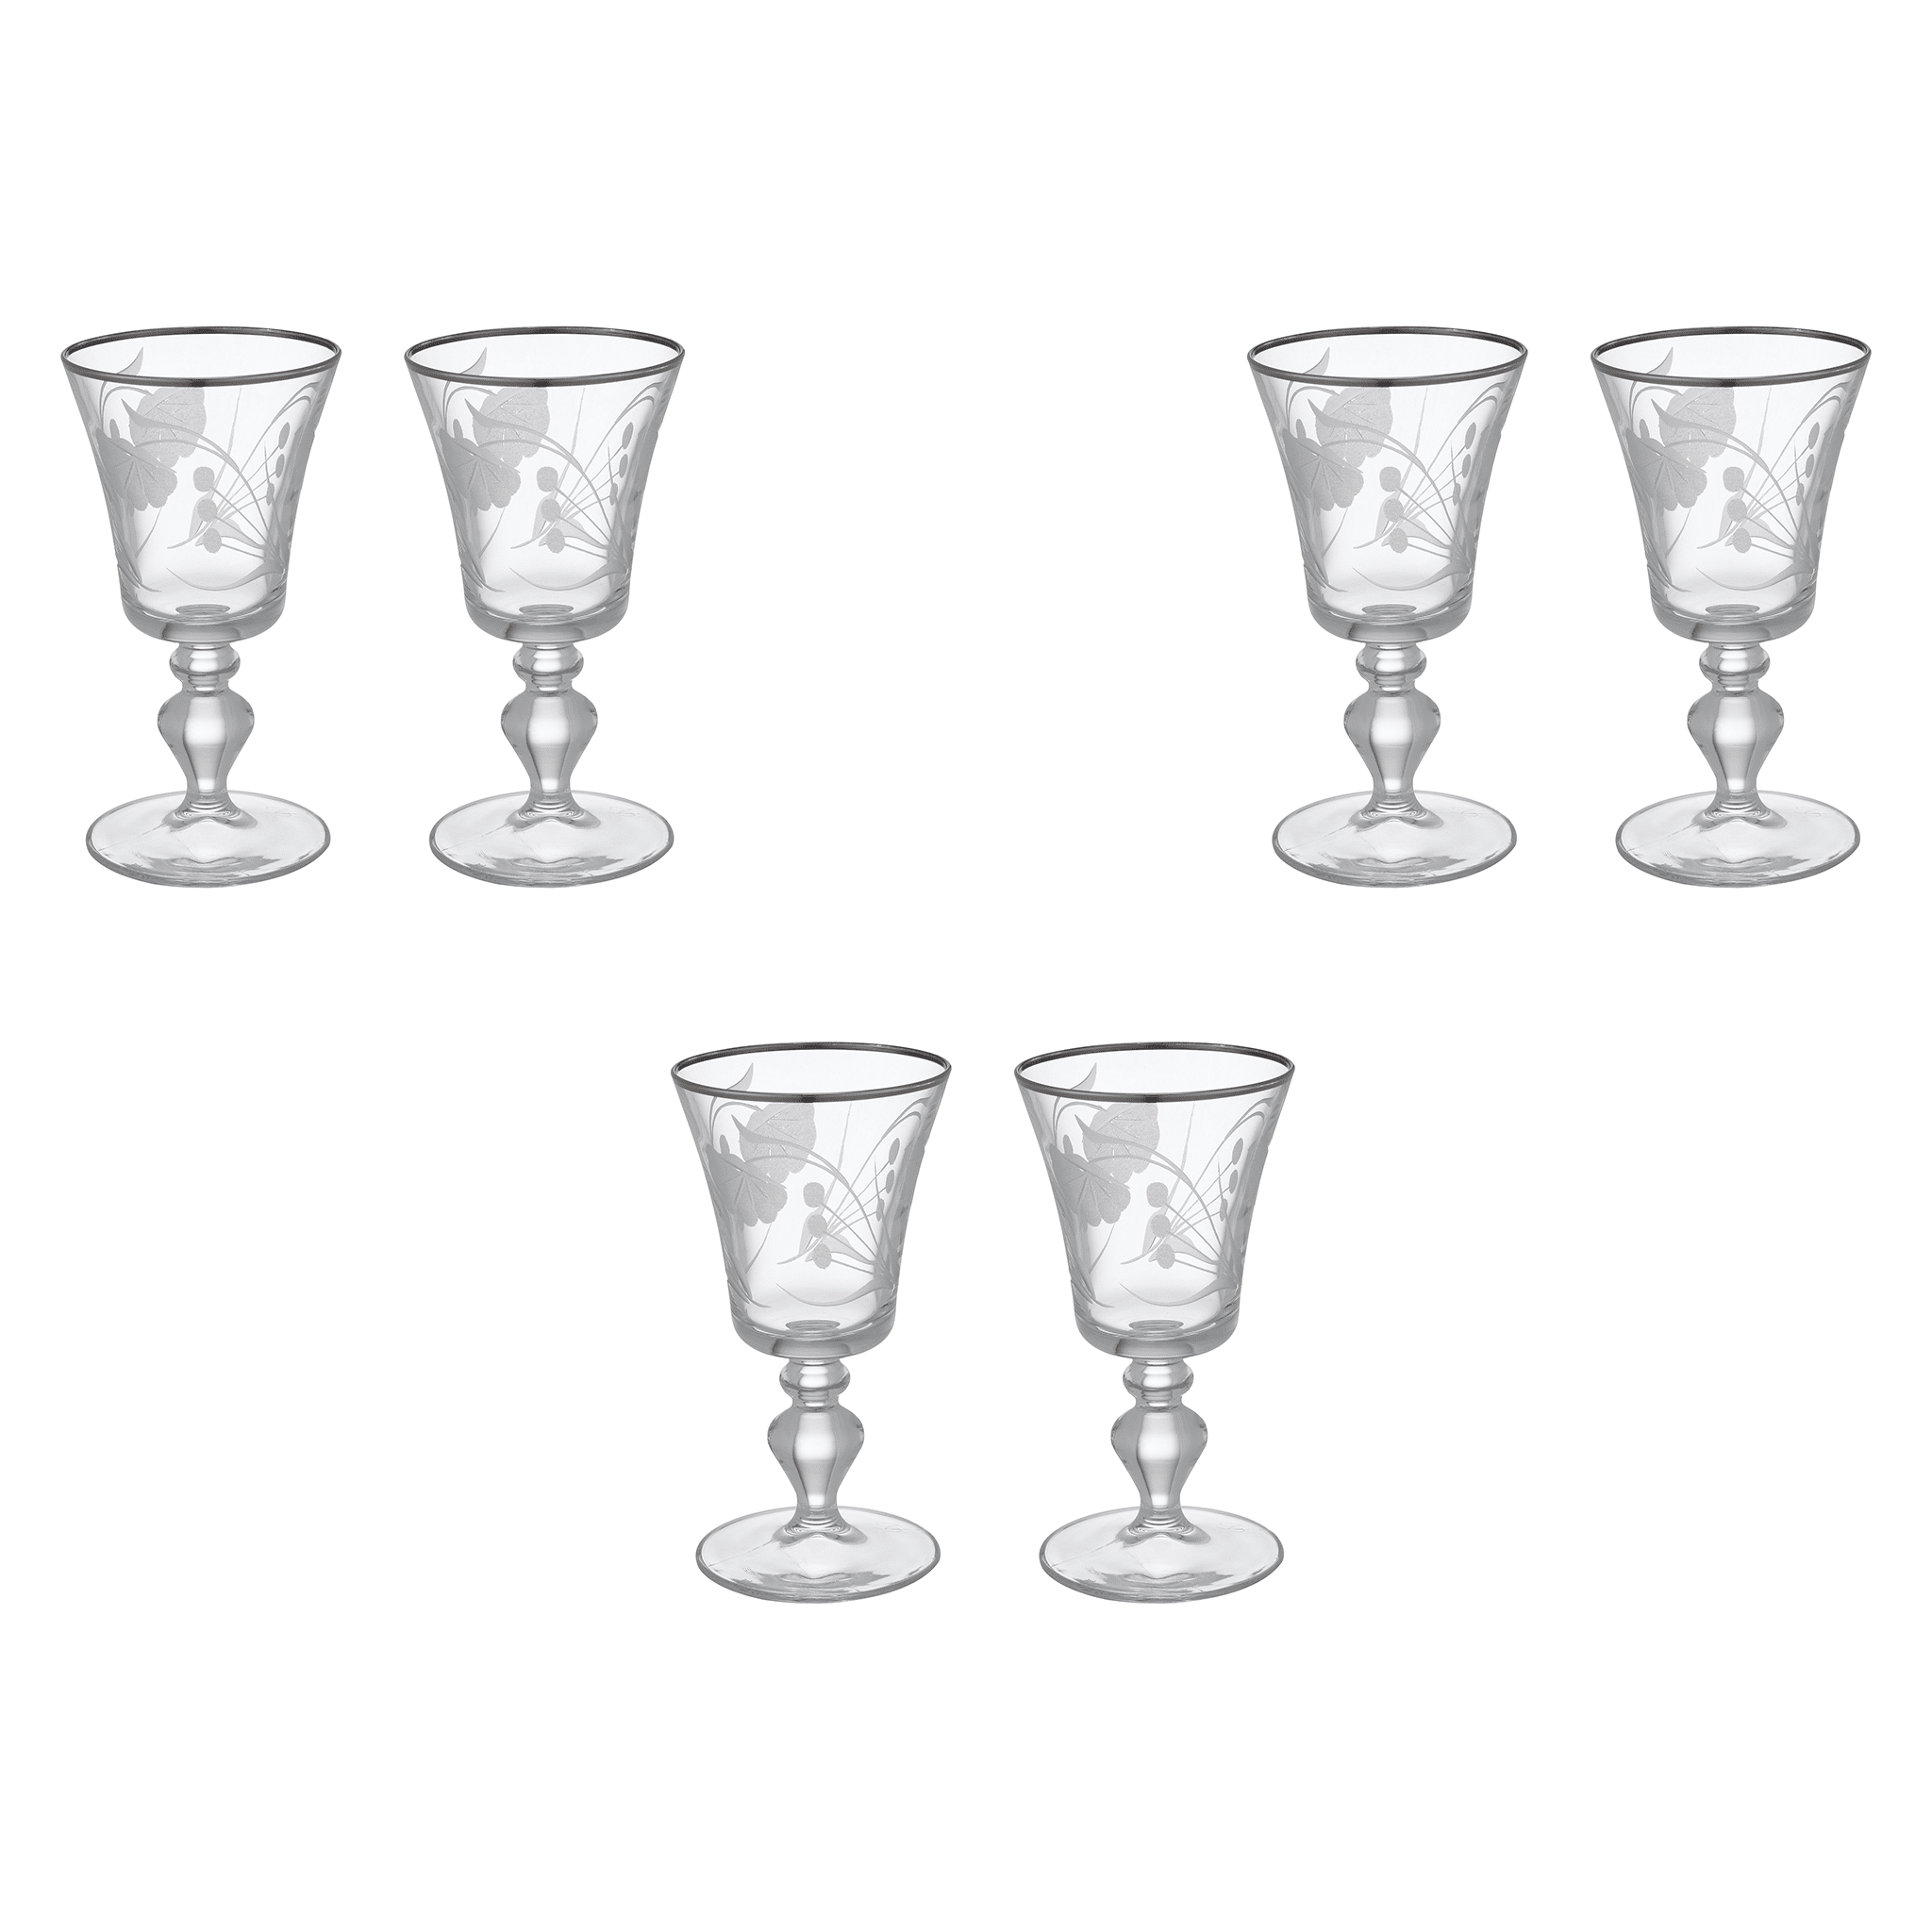 Pasabahce - Decorated Goblet Glass Set 6 Pieces - Silver - 195ml - Glass - 390005055